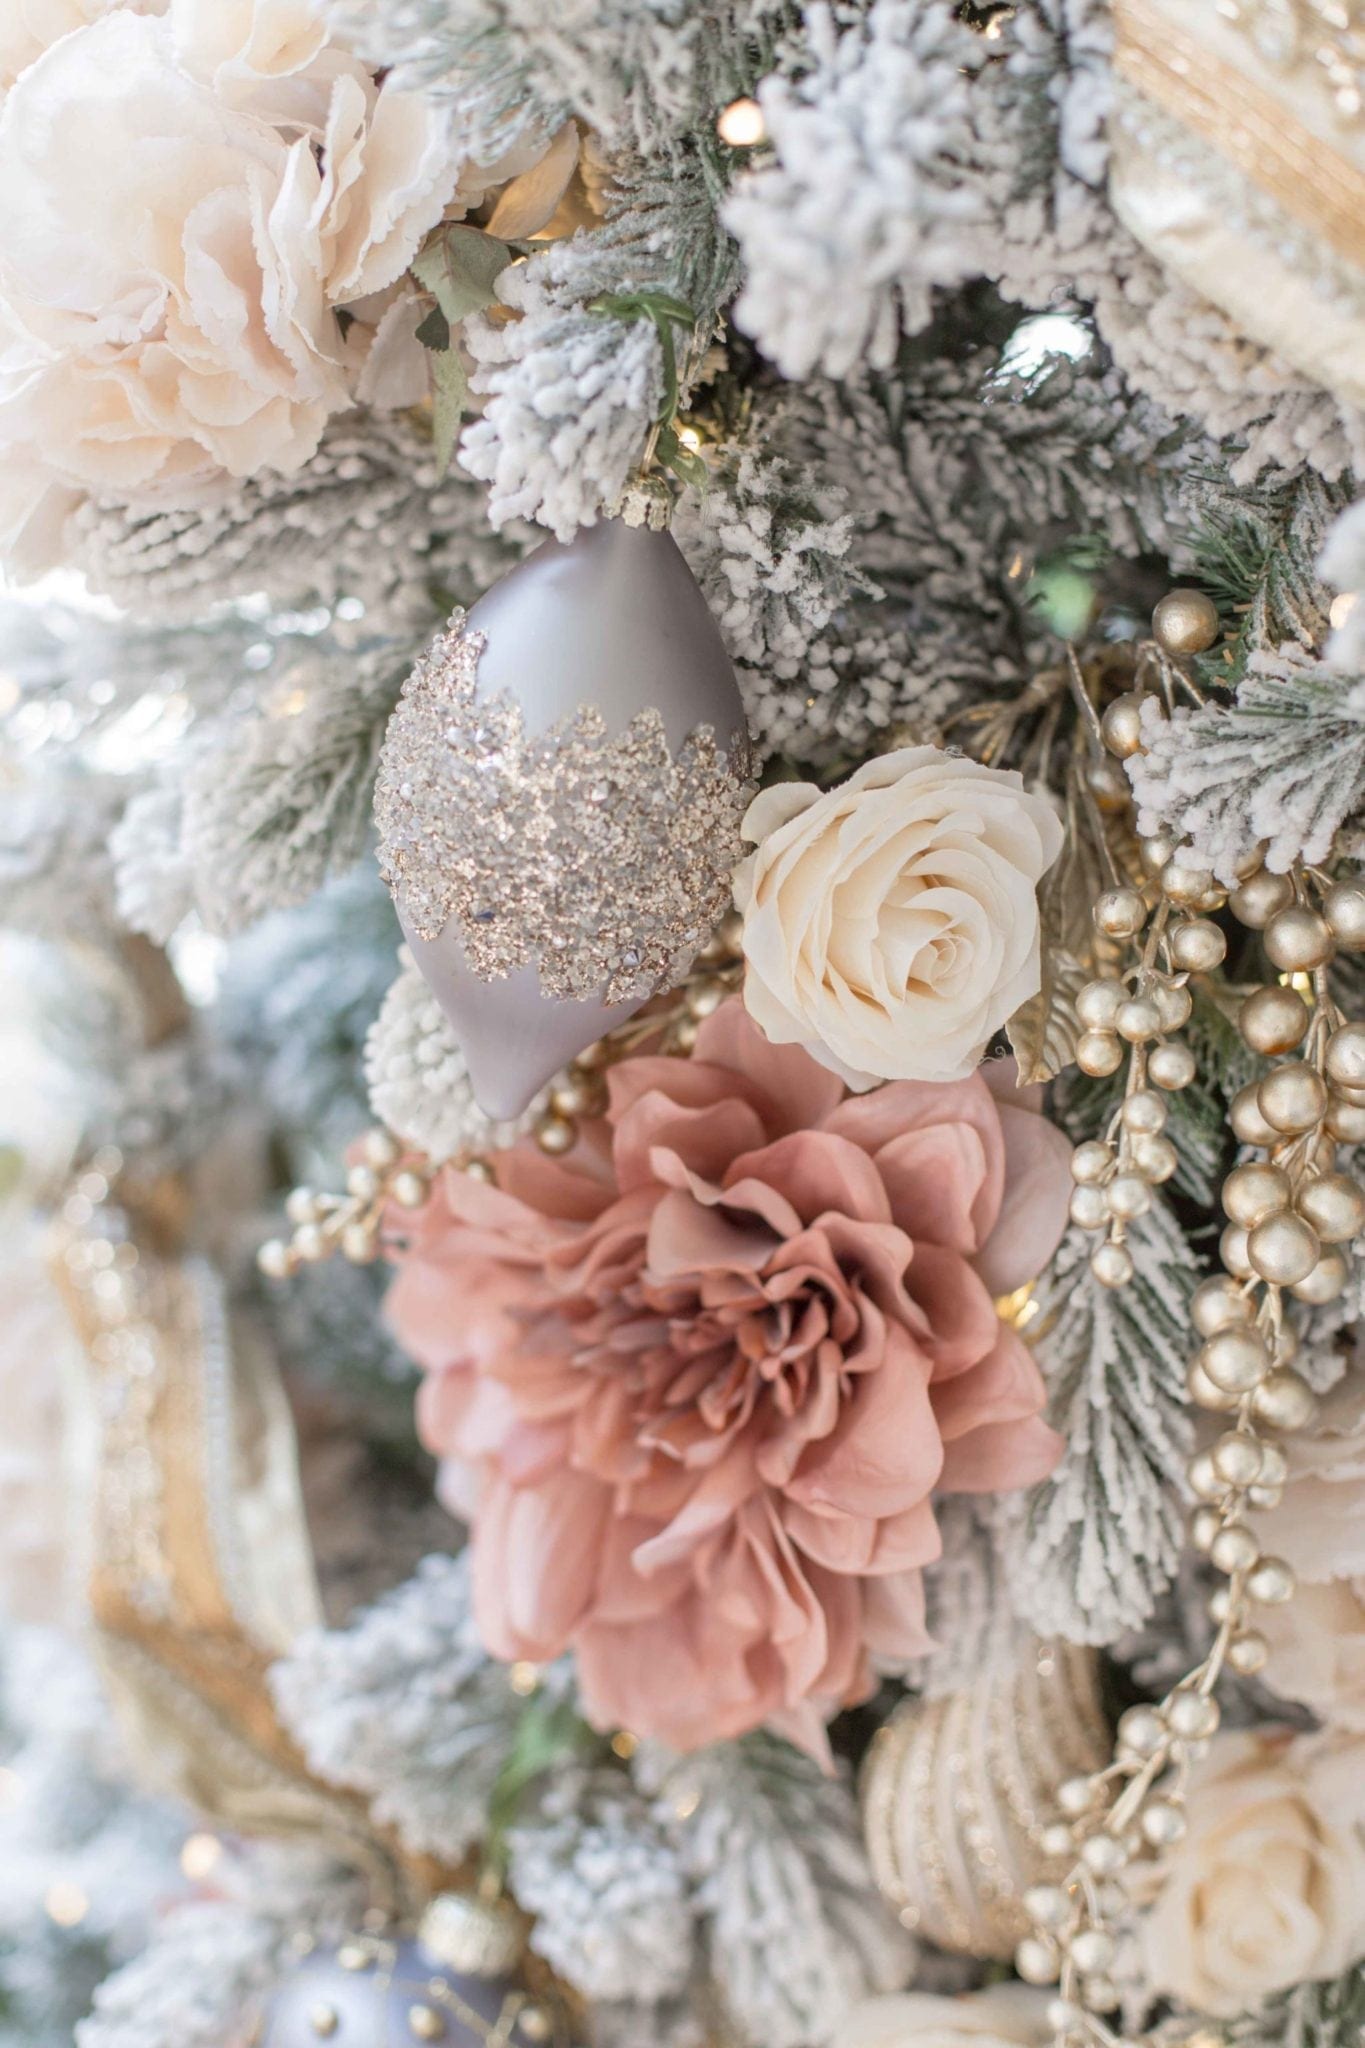 Artificial roses and gray ornaments add a pretty gray and pink design to this King of Christmas artificial tree. Tips to decorate a gray, pink, ivory and gold Christmas tree!